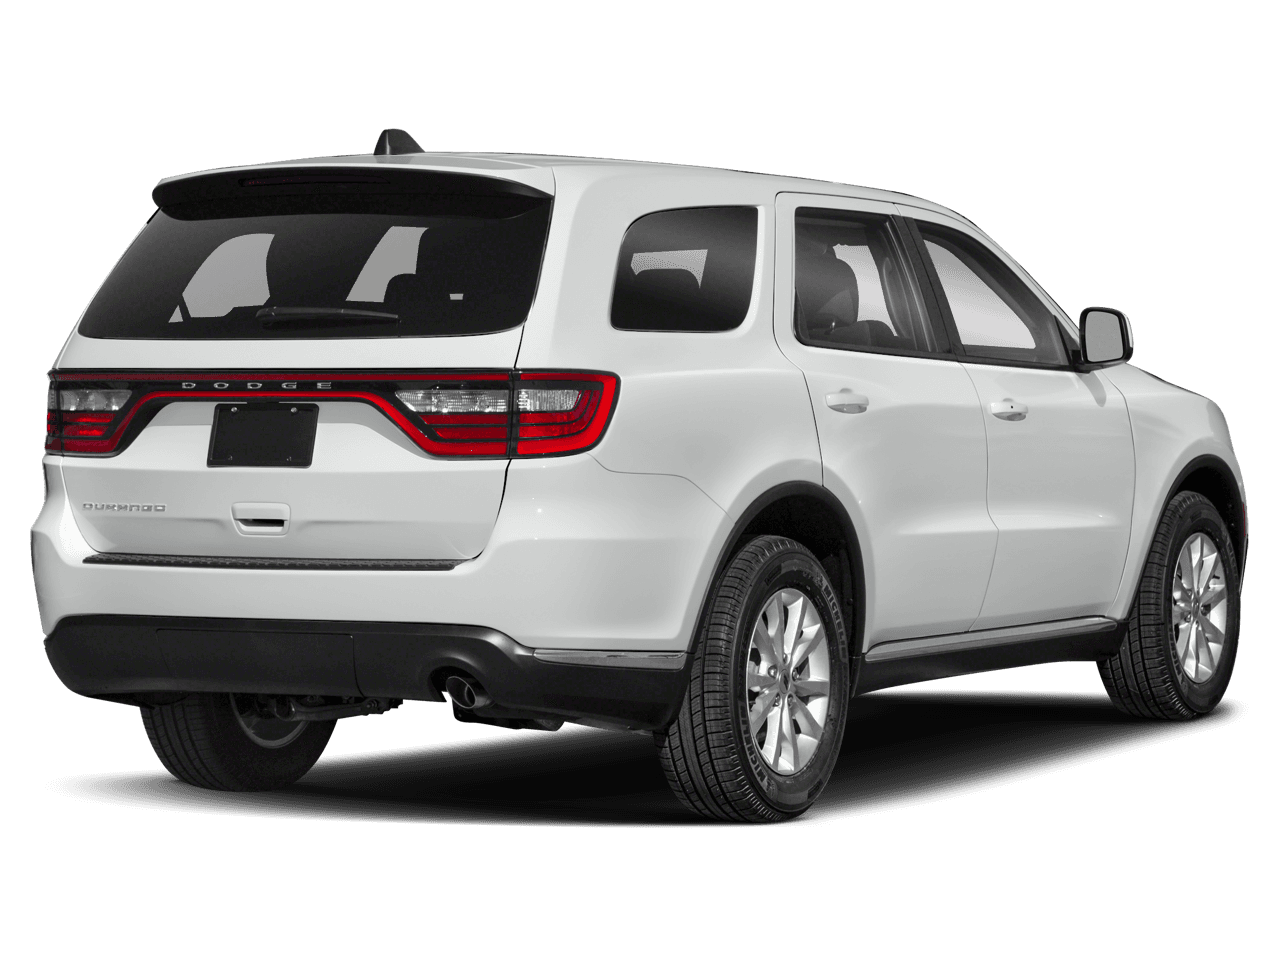 2022 Dodge Durango Photo in Wooster, OH 44691